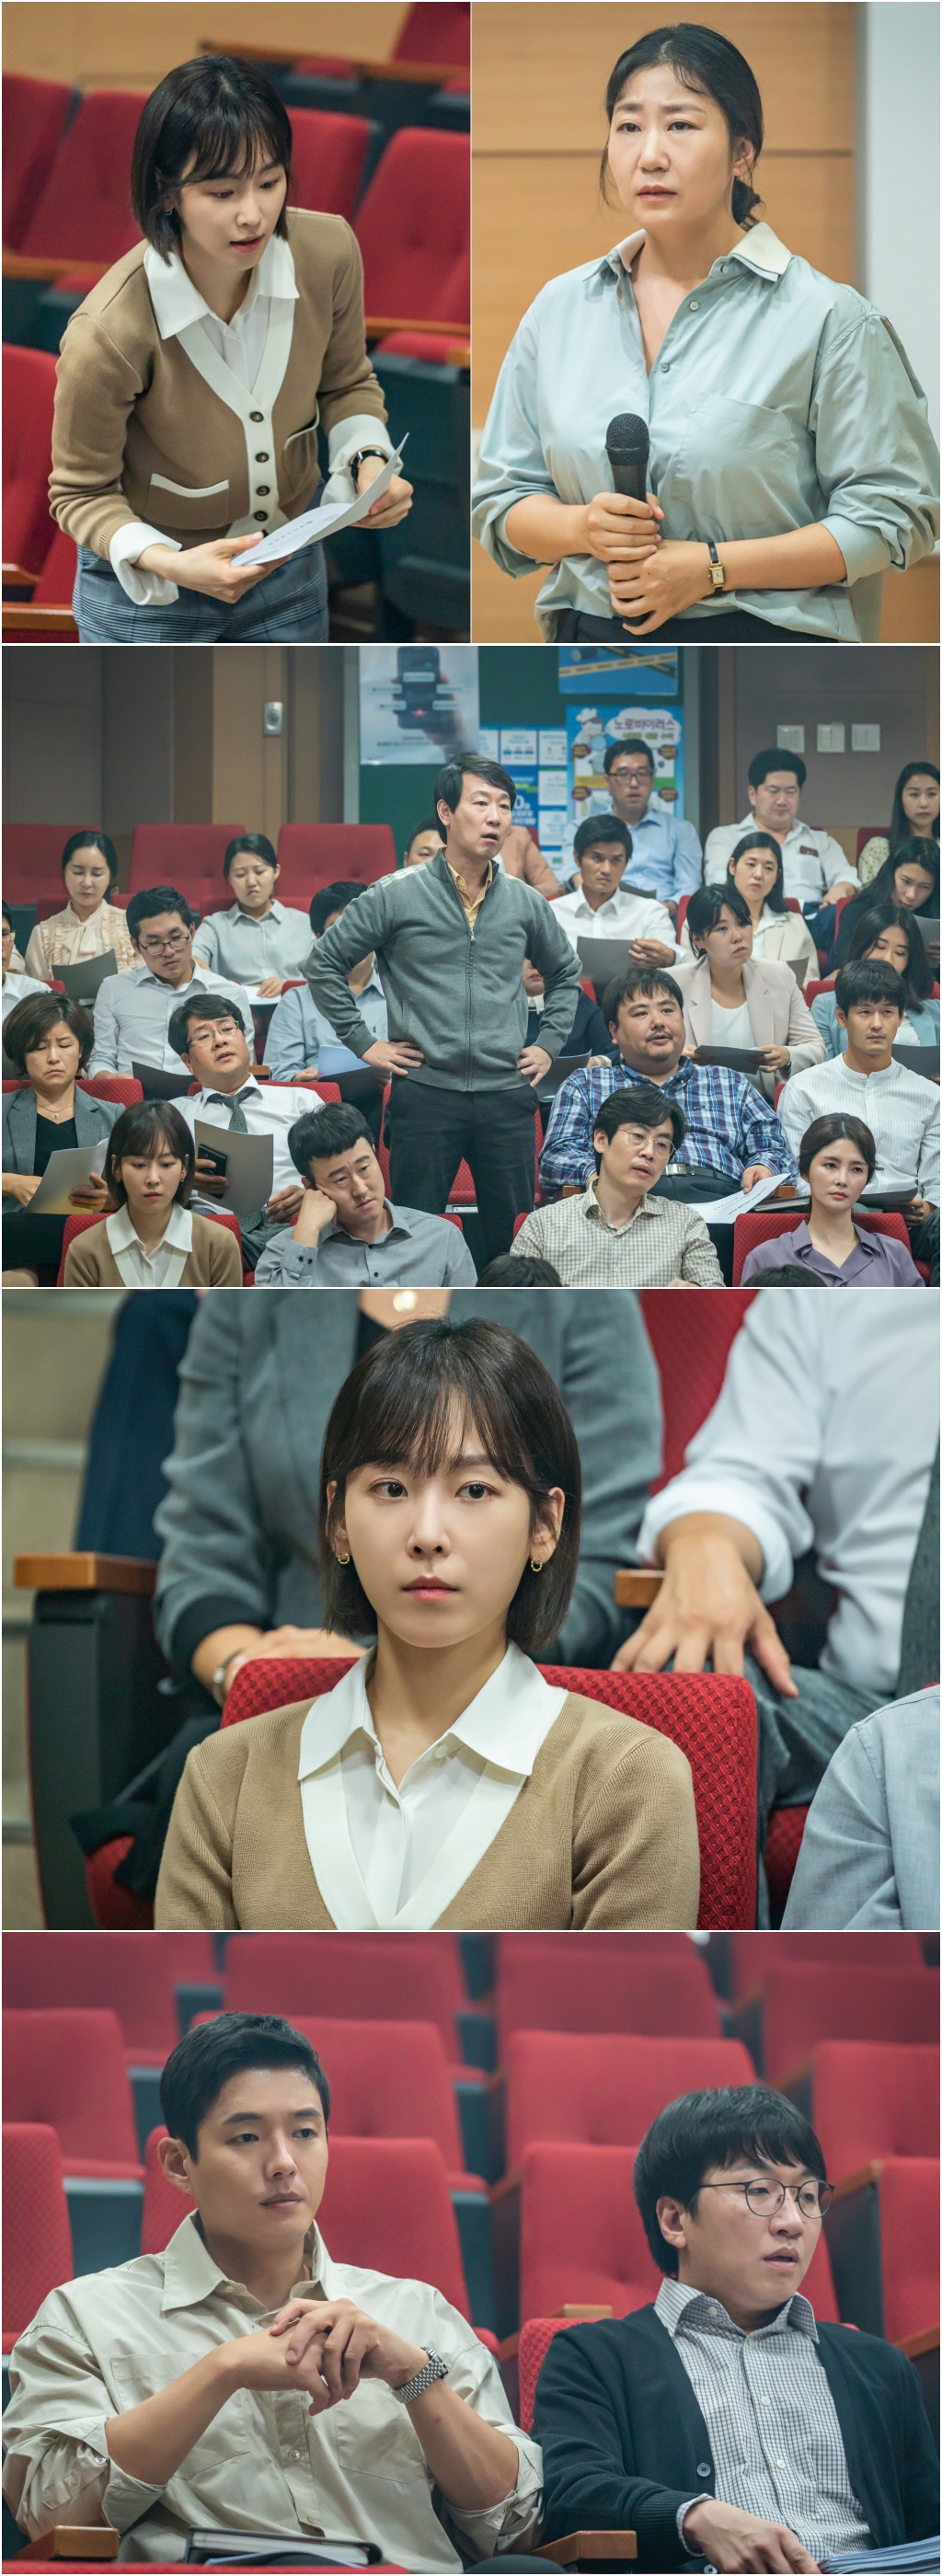 Seo Hyun-jin and Ra Mi-ran, who face the problem of the school system, struggle to find a solution.TVN Mon-Tue drama Black Dog (director Hwang Joon-hyuk, playwright Park Joo-yeon, production studio Dragon, and Urban Works) will reveal the appearance of the admission department, which is in conflict with the teachers, on the 31st, amplifying the curiosity.In the last broadcast, the department of admission, including the high-ranking student (Seo Hyun-jin), tried to find a university entrance examination and get major entrance examination information, but failed.After the consultation, the admissions officer said that even if someone else came, it would have been difficult to get the information he wanted from the life record, and he expressed his frank opinion that the data alone is less competitive than the surrounding school.Rather than the individual ability problem of the students, the school itself has a big problem with the system and teachers.However, the sky, which could not easily inform the school, looked at the school materials and went out to find a solution alone.In the meantime, the photo shows the entrance department to publicize the school system problem.While teachers are in the conference room ahead of the opening of the In-Shim class club, the appearance of Park Sung-soon (Ra Mi-ran), the head of the department of admission, holding a microphone, catches the eye.Park Sung-soon, who has always faced unfair things first, claiming to be a crazy dog in this area, is also tense on this day. The expression of the family members of the school who keep his side silently is also heavy.As Park Sung-soon, who breaks the silence, continues, the atmosphere is tingling for a moment. The atmosphere of the meeting room day increases tension, starting with the teacher who stands up and expresses his opinion strongly.Then, a high sky was also caught, distributing data supporting Park Sung-soons words.The high-rise Yi Gi, who has been looking for problems with school, raises the question of what kind of school system problem he has found and what kind of wave a small ball that the department of education has courageously shot up will cause to school.In the 6th episode, which will be broadcast today (31st), the decision of the high sky and the department of study, which analyzed the data of the school type (comprehensive selection of the student department), will bring a blue to the school.It is an uncomfortable truth, but it is not easy to change the system of a long school, although it is a college entrance school that decided to go to the front, but it is not easy to change the system of a long school.It is noteworthy how the efforts of the department of education, which is trying to persuade fellow teachers sincerely for students, will lead to results.The Department of Education is facing the school problem for students, said Black Dog.We will show a section of the educational reality that everyone can sympathize with, he said. Whether their sincerity can change the school, please watch the four members of the school go on.The sixth episode of Black Dog will air today (31st) at 9:30 p.m.